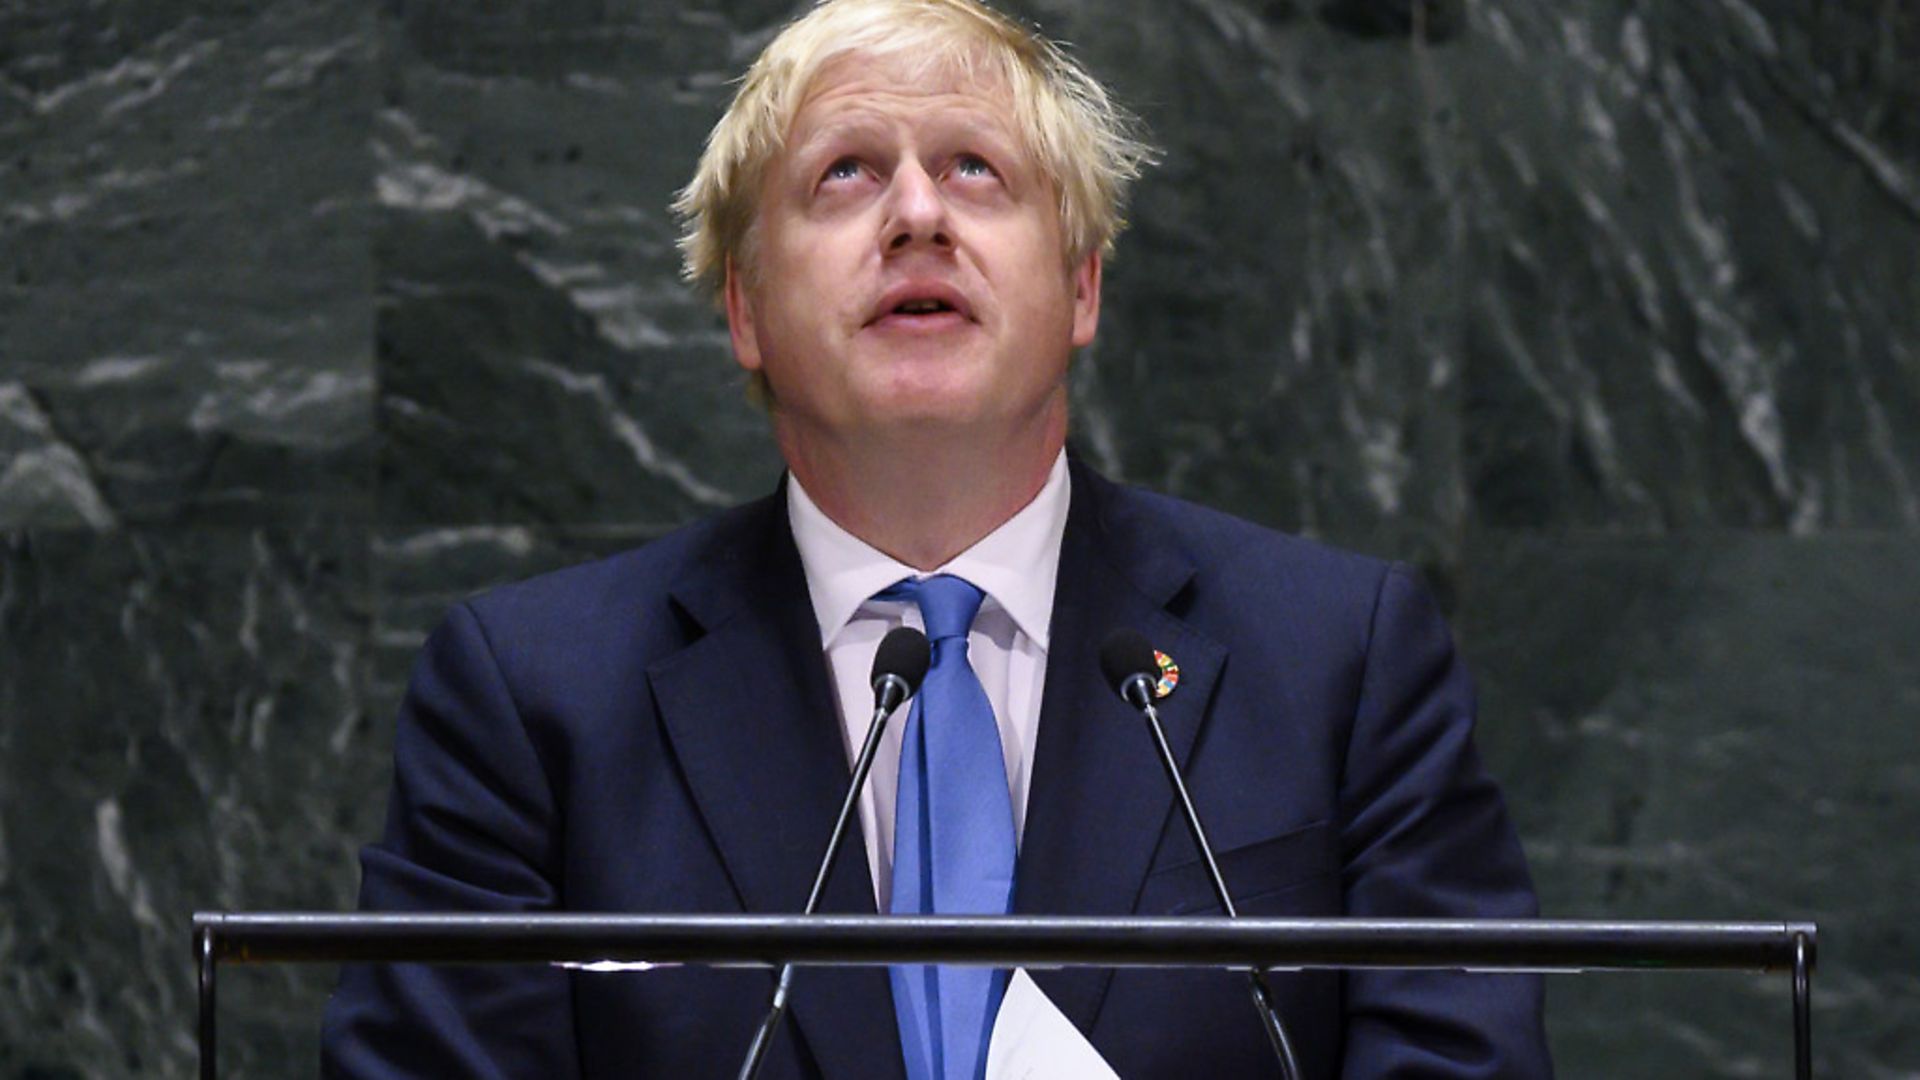 Boris Johnson speaks during the 74th session of the United Nations General Assembly. (Photograph by Johannes EISELE / AFP). - Credit: AFP/Getty Images